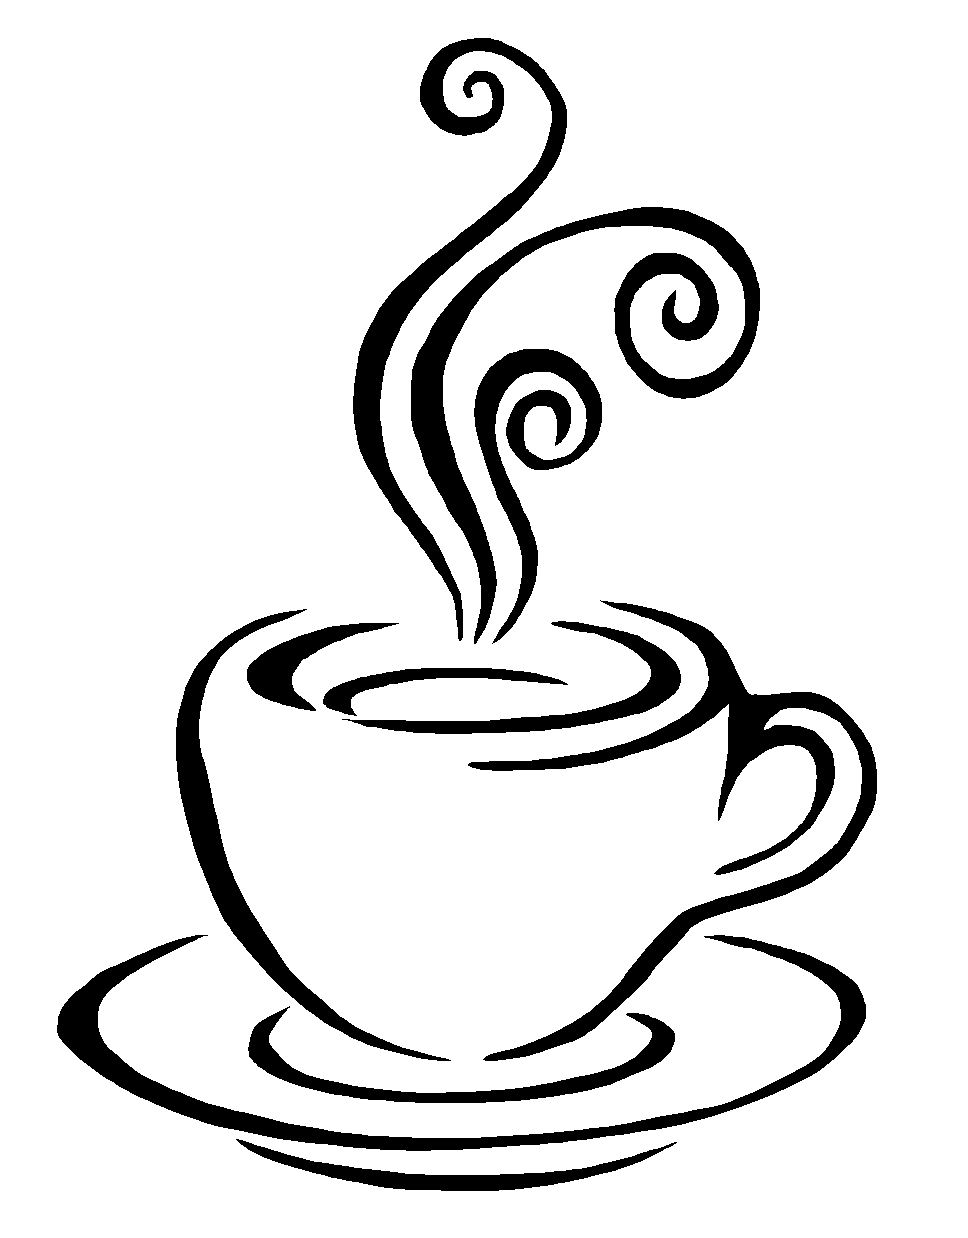 Clipart coffee coffee station. Image detail for bar